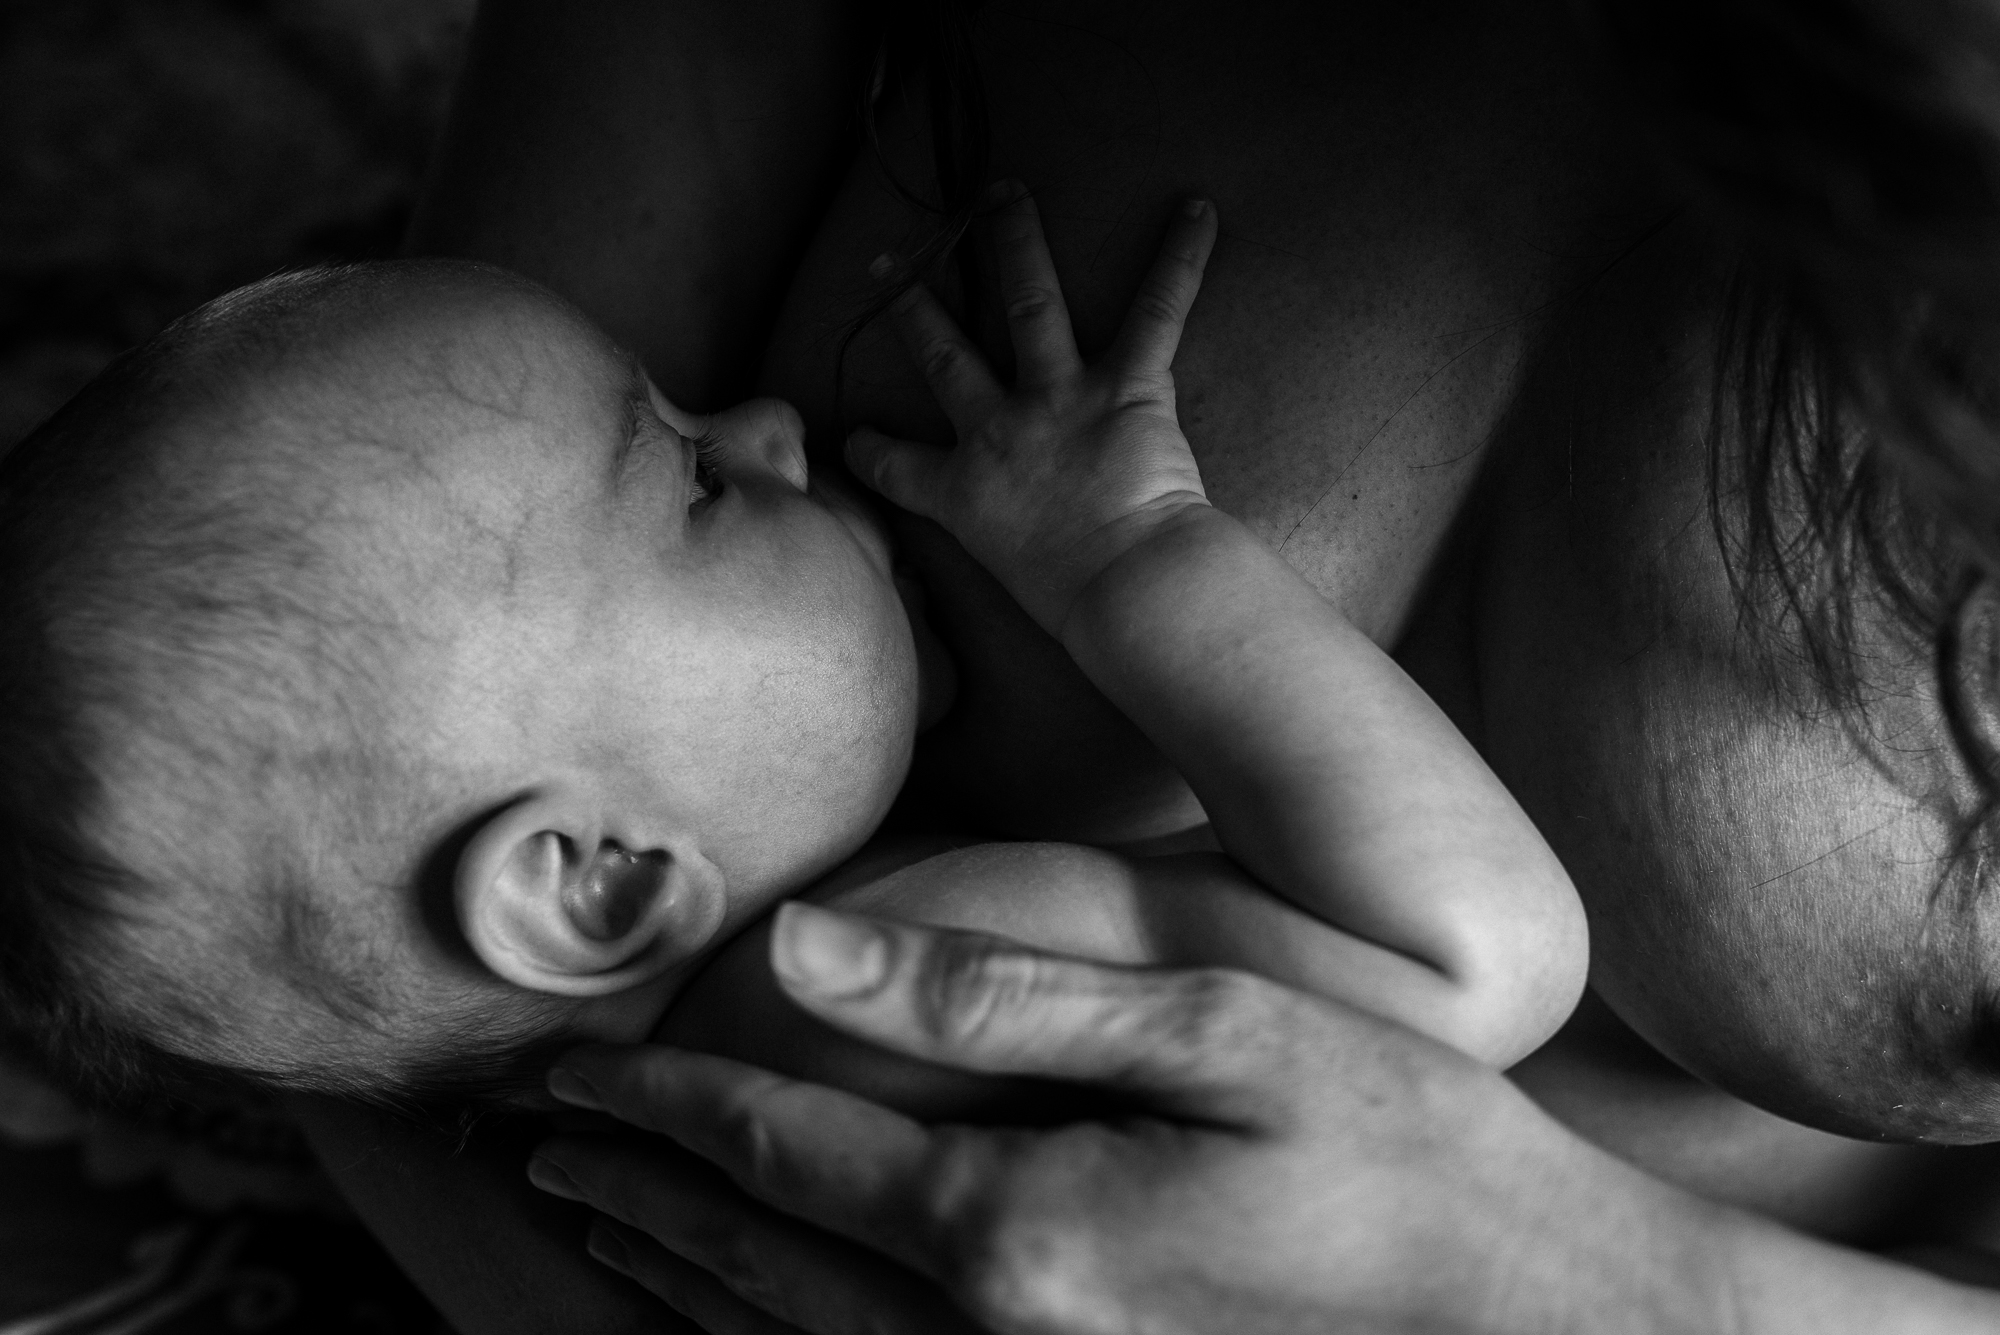 Minneapolis Postpartum Photography by Meredith Westin-May 14, 2019-125521.jpg